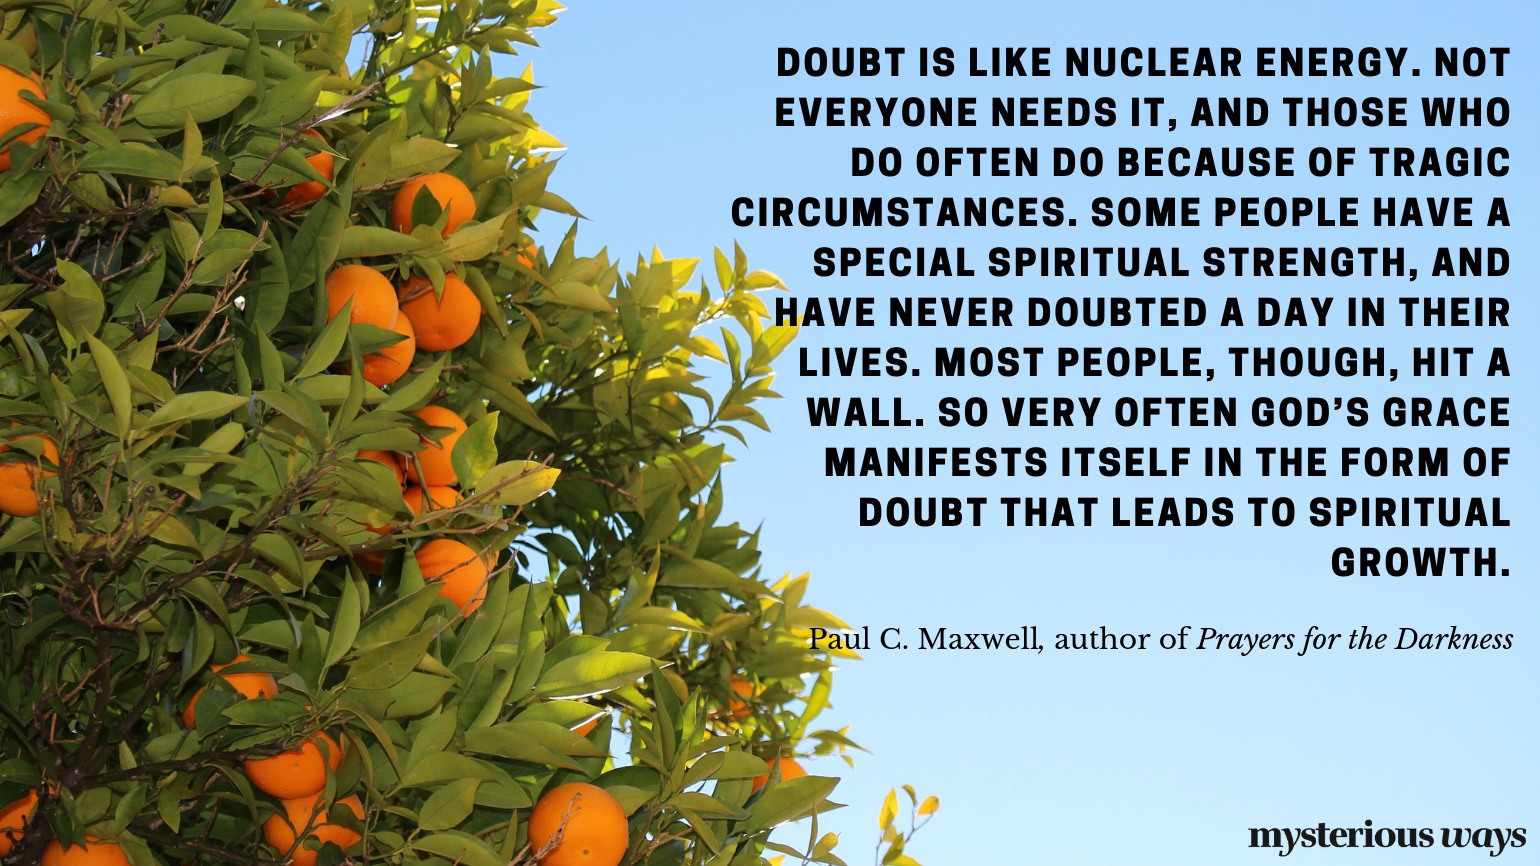 “Doubt is like nuclear energy. Not everyone needs it, and those who do often do because of tragic circumstances. Some people have a special spiritual strength, and have never doubted a day in their lives.Most people, though, hit a wall. So very often God’s grace manifests itself in the form of doubt that leads to spiritual growth.”